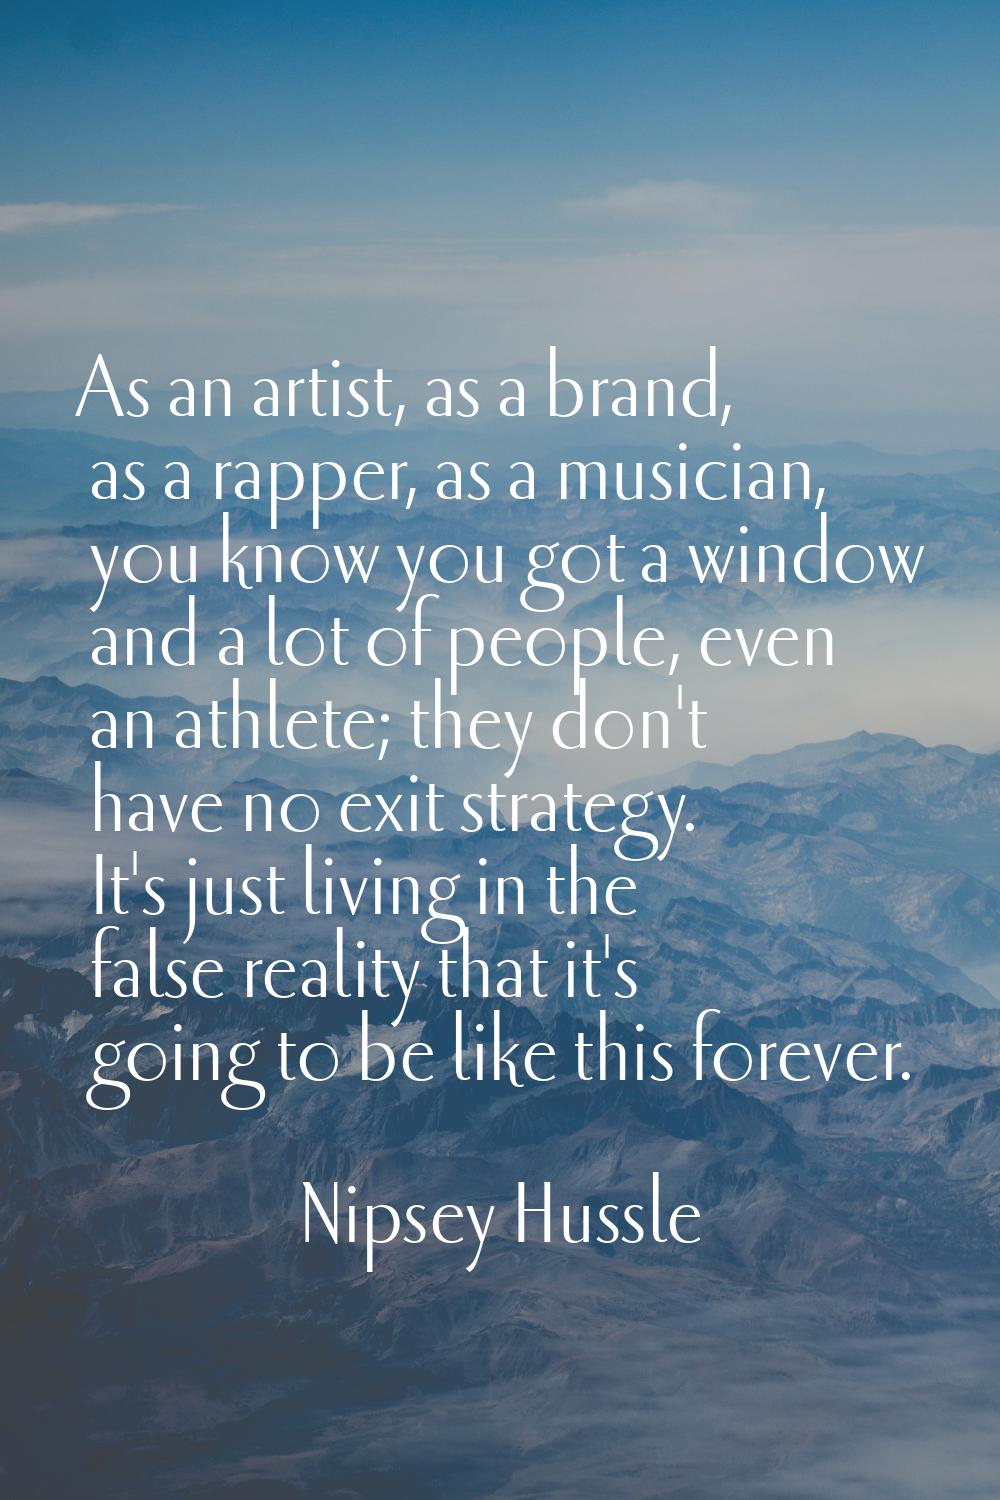 As an artist, as a brand, as a rapper, as a musician, you know you got a window and a lot of people